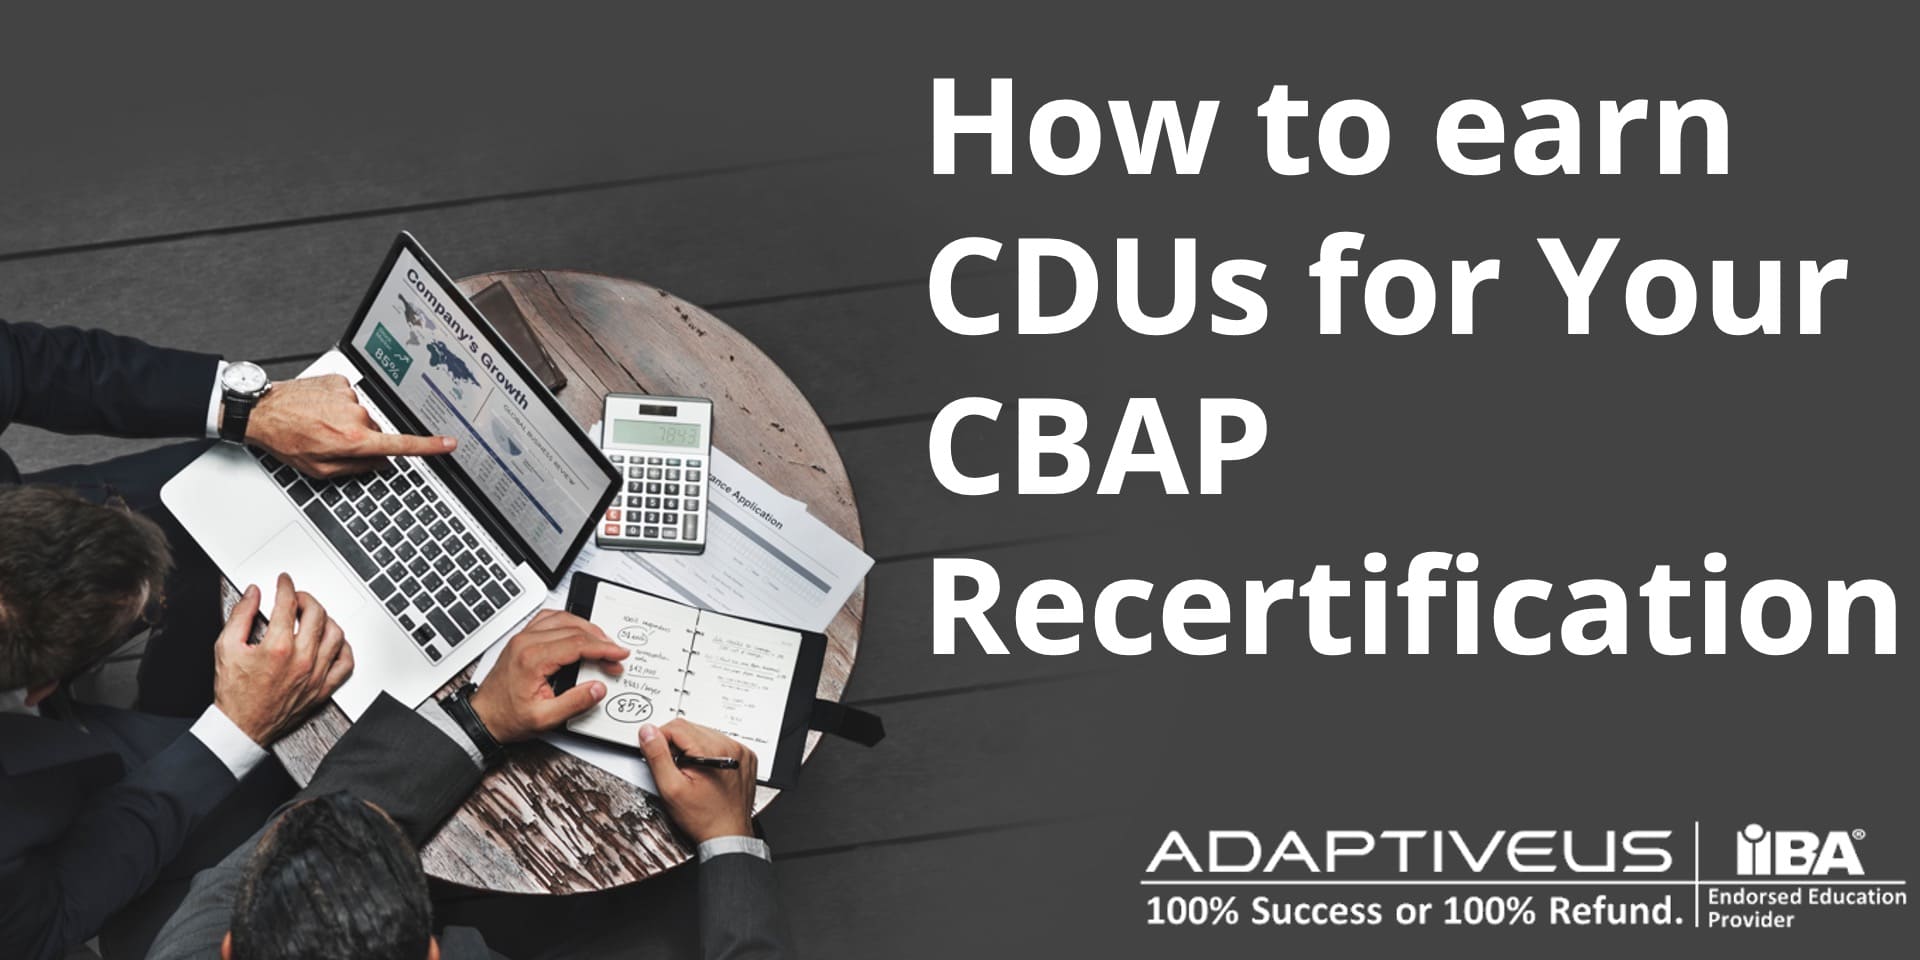 How to earn CDUs for Your CBAP Recertification